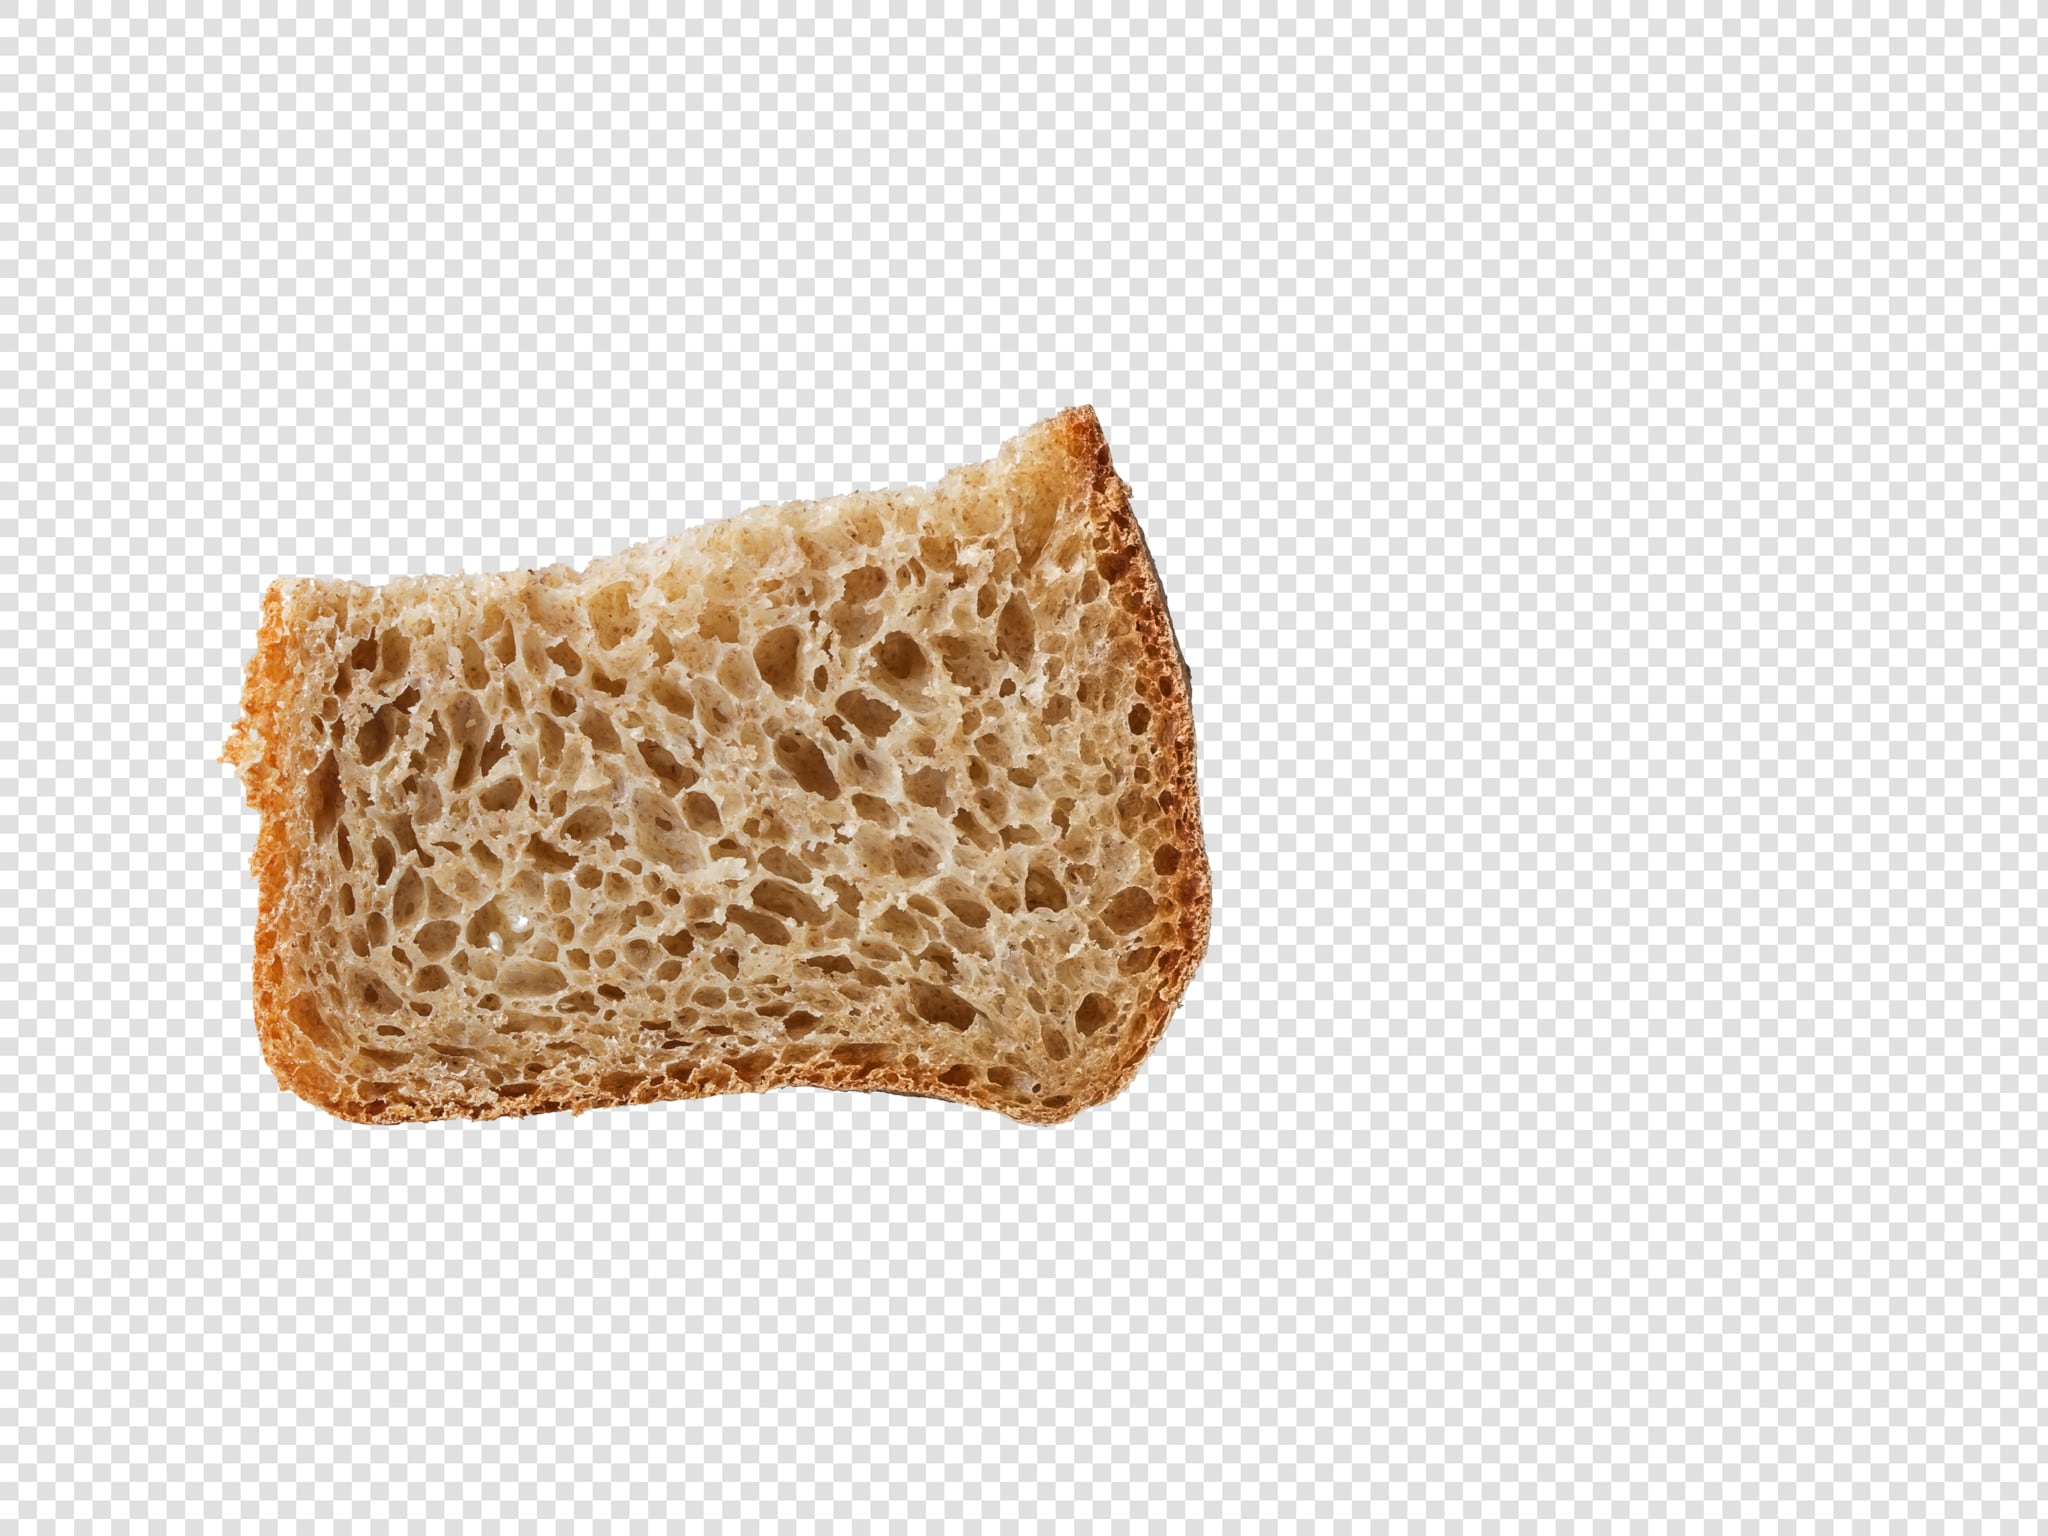 Bread PSD image with transparent background